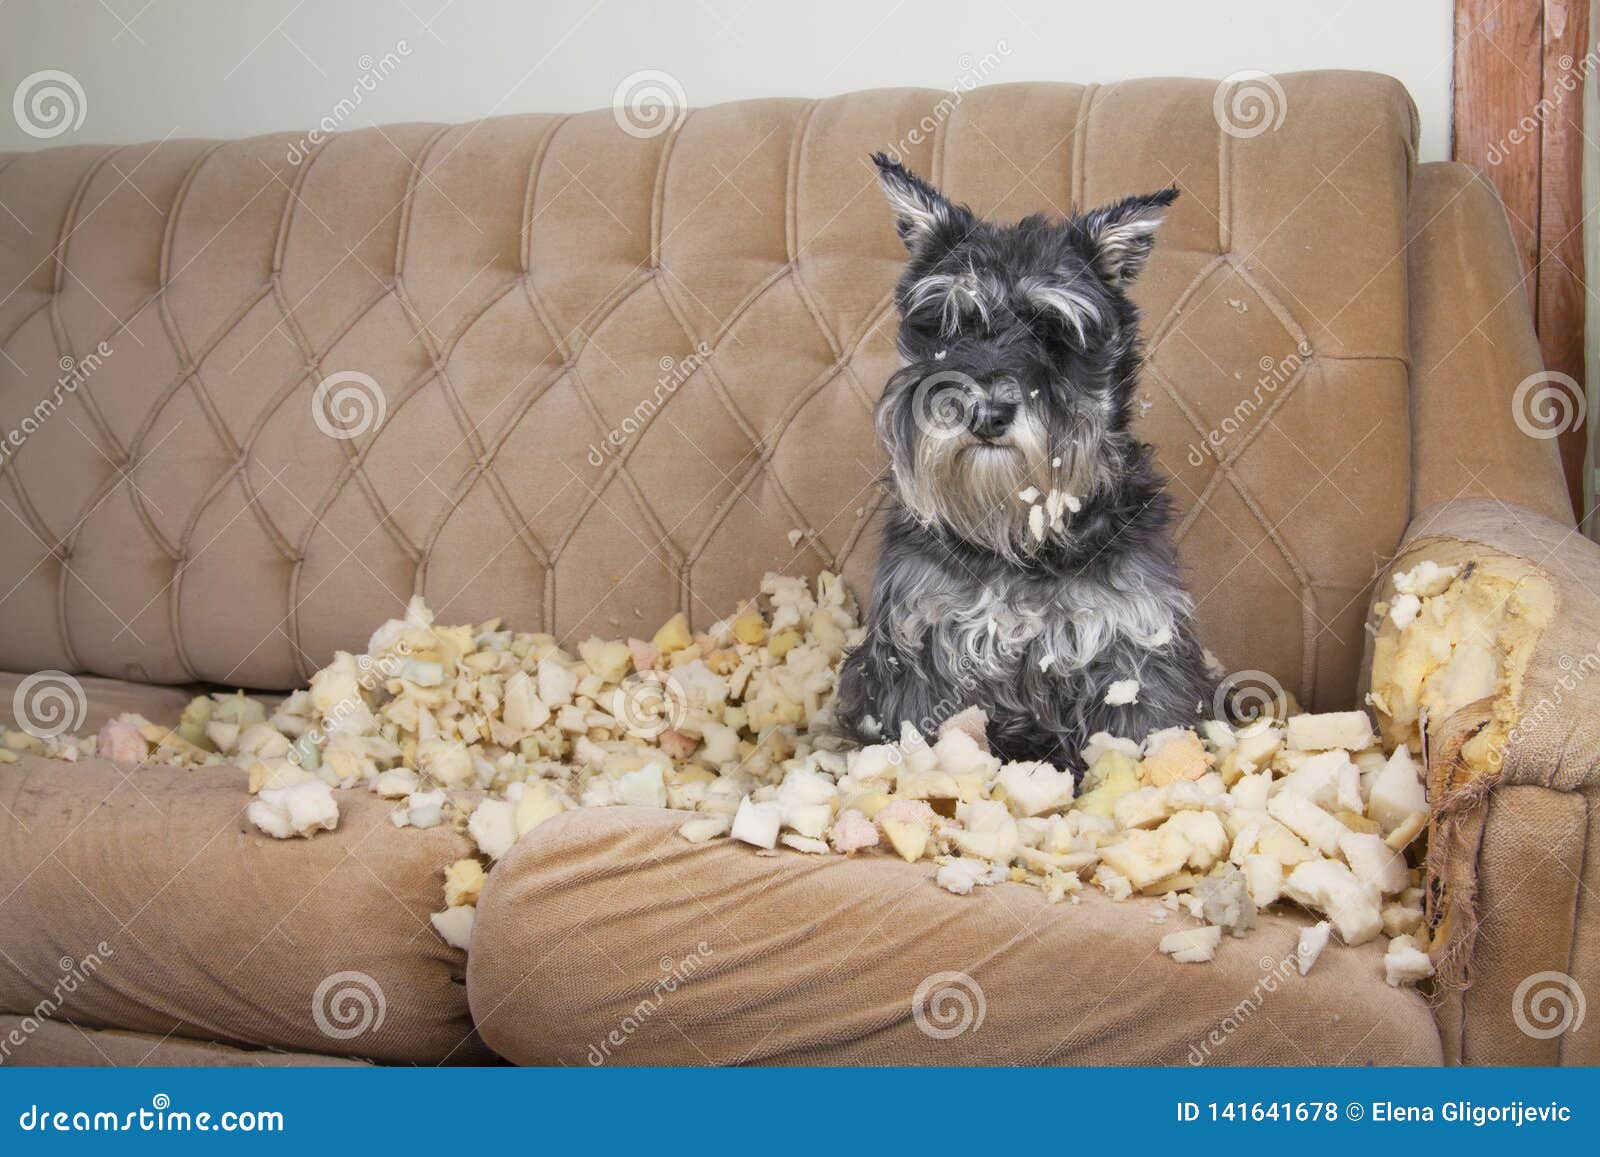 naughty bad schnauzer puppy dog lies on a couch that she has just destroyed.